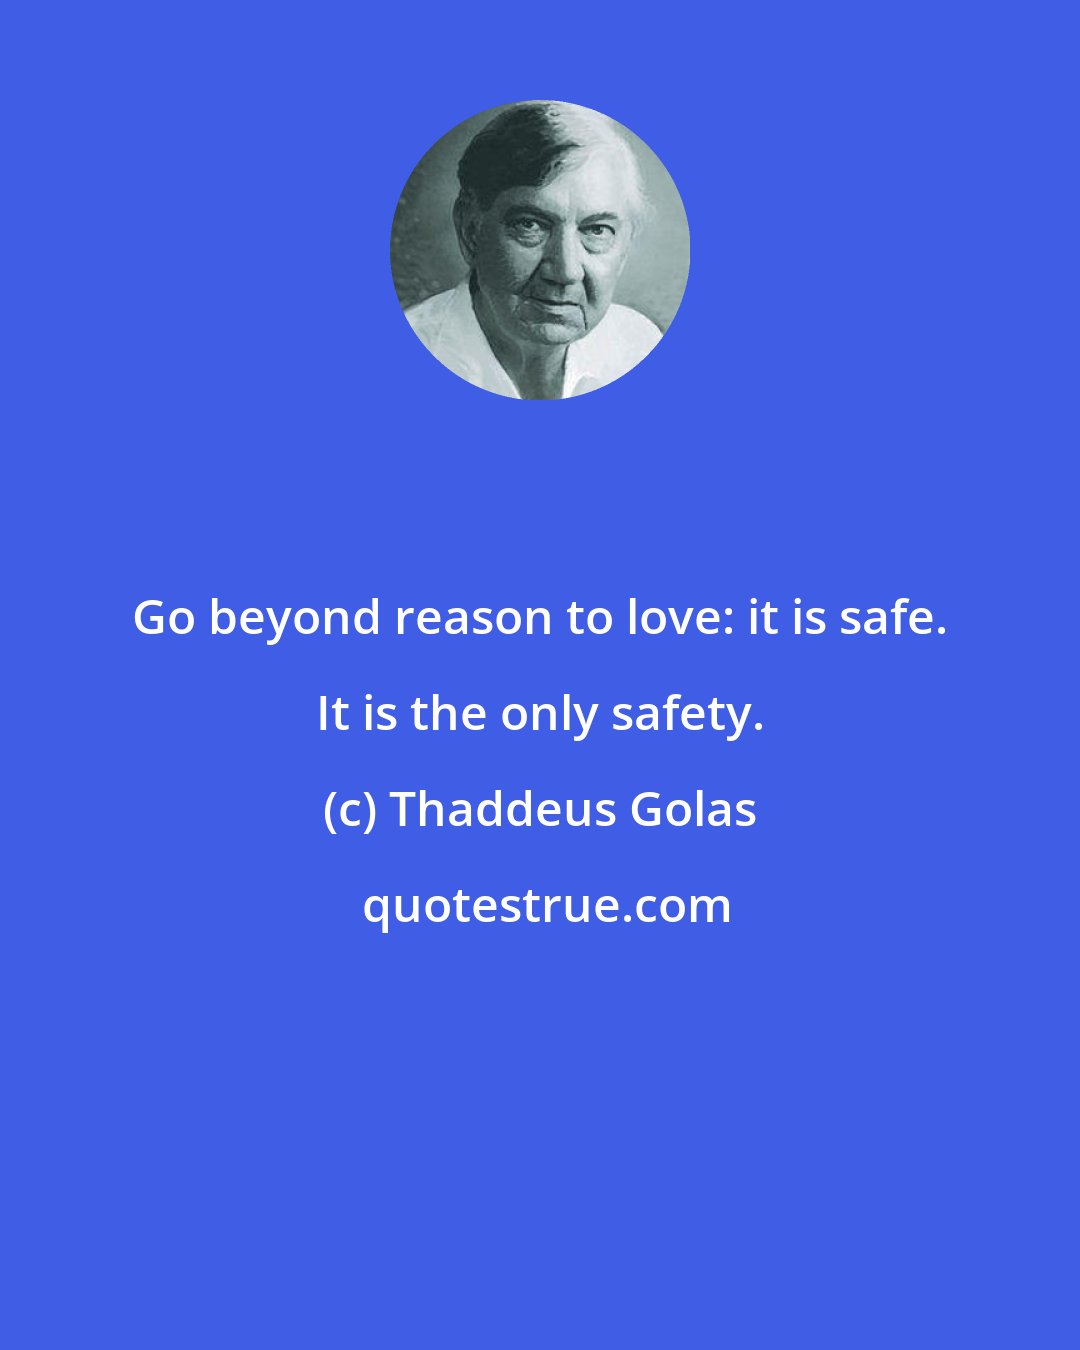 Thaddeus Golas: Go beyond reason to love: it is safe. It is the only safety.